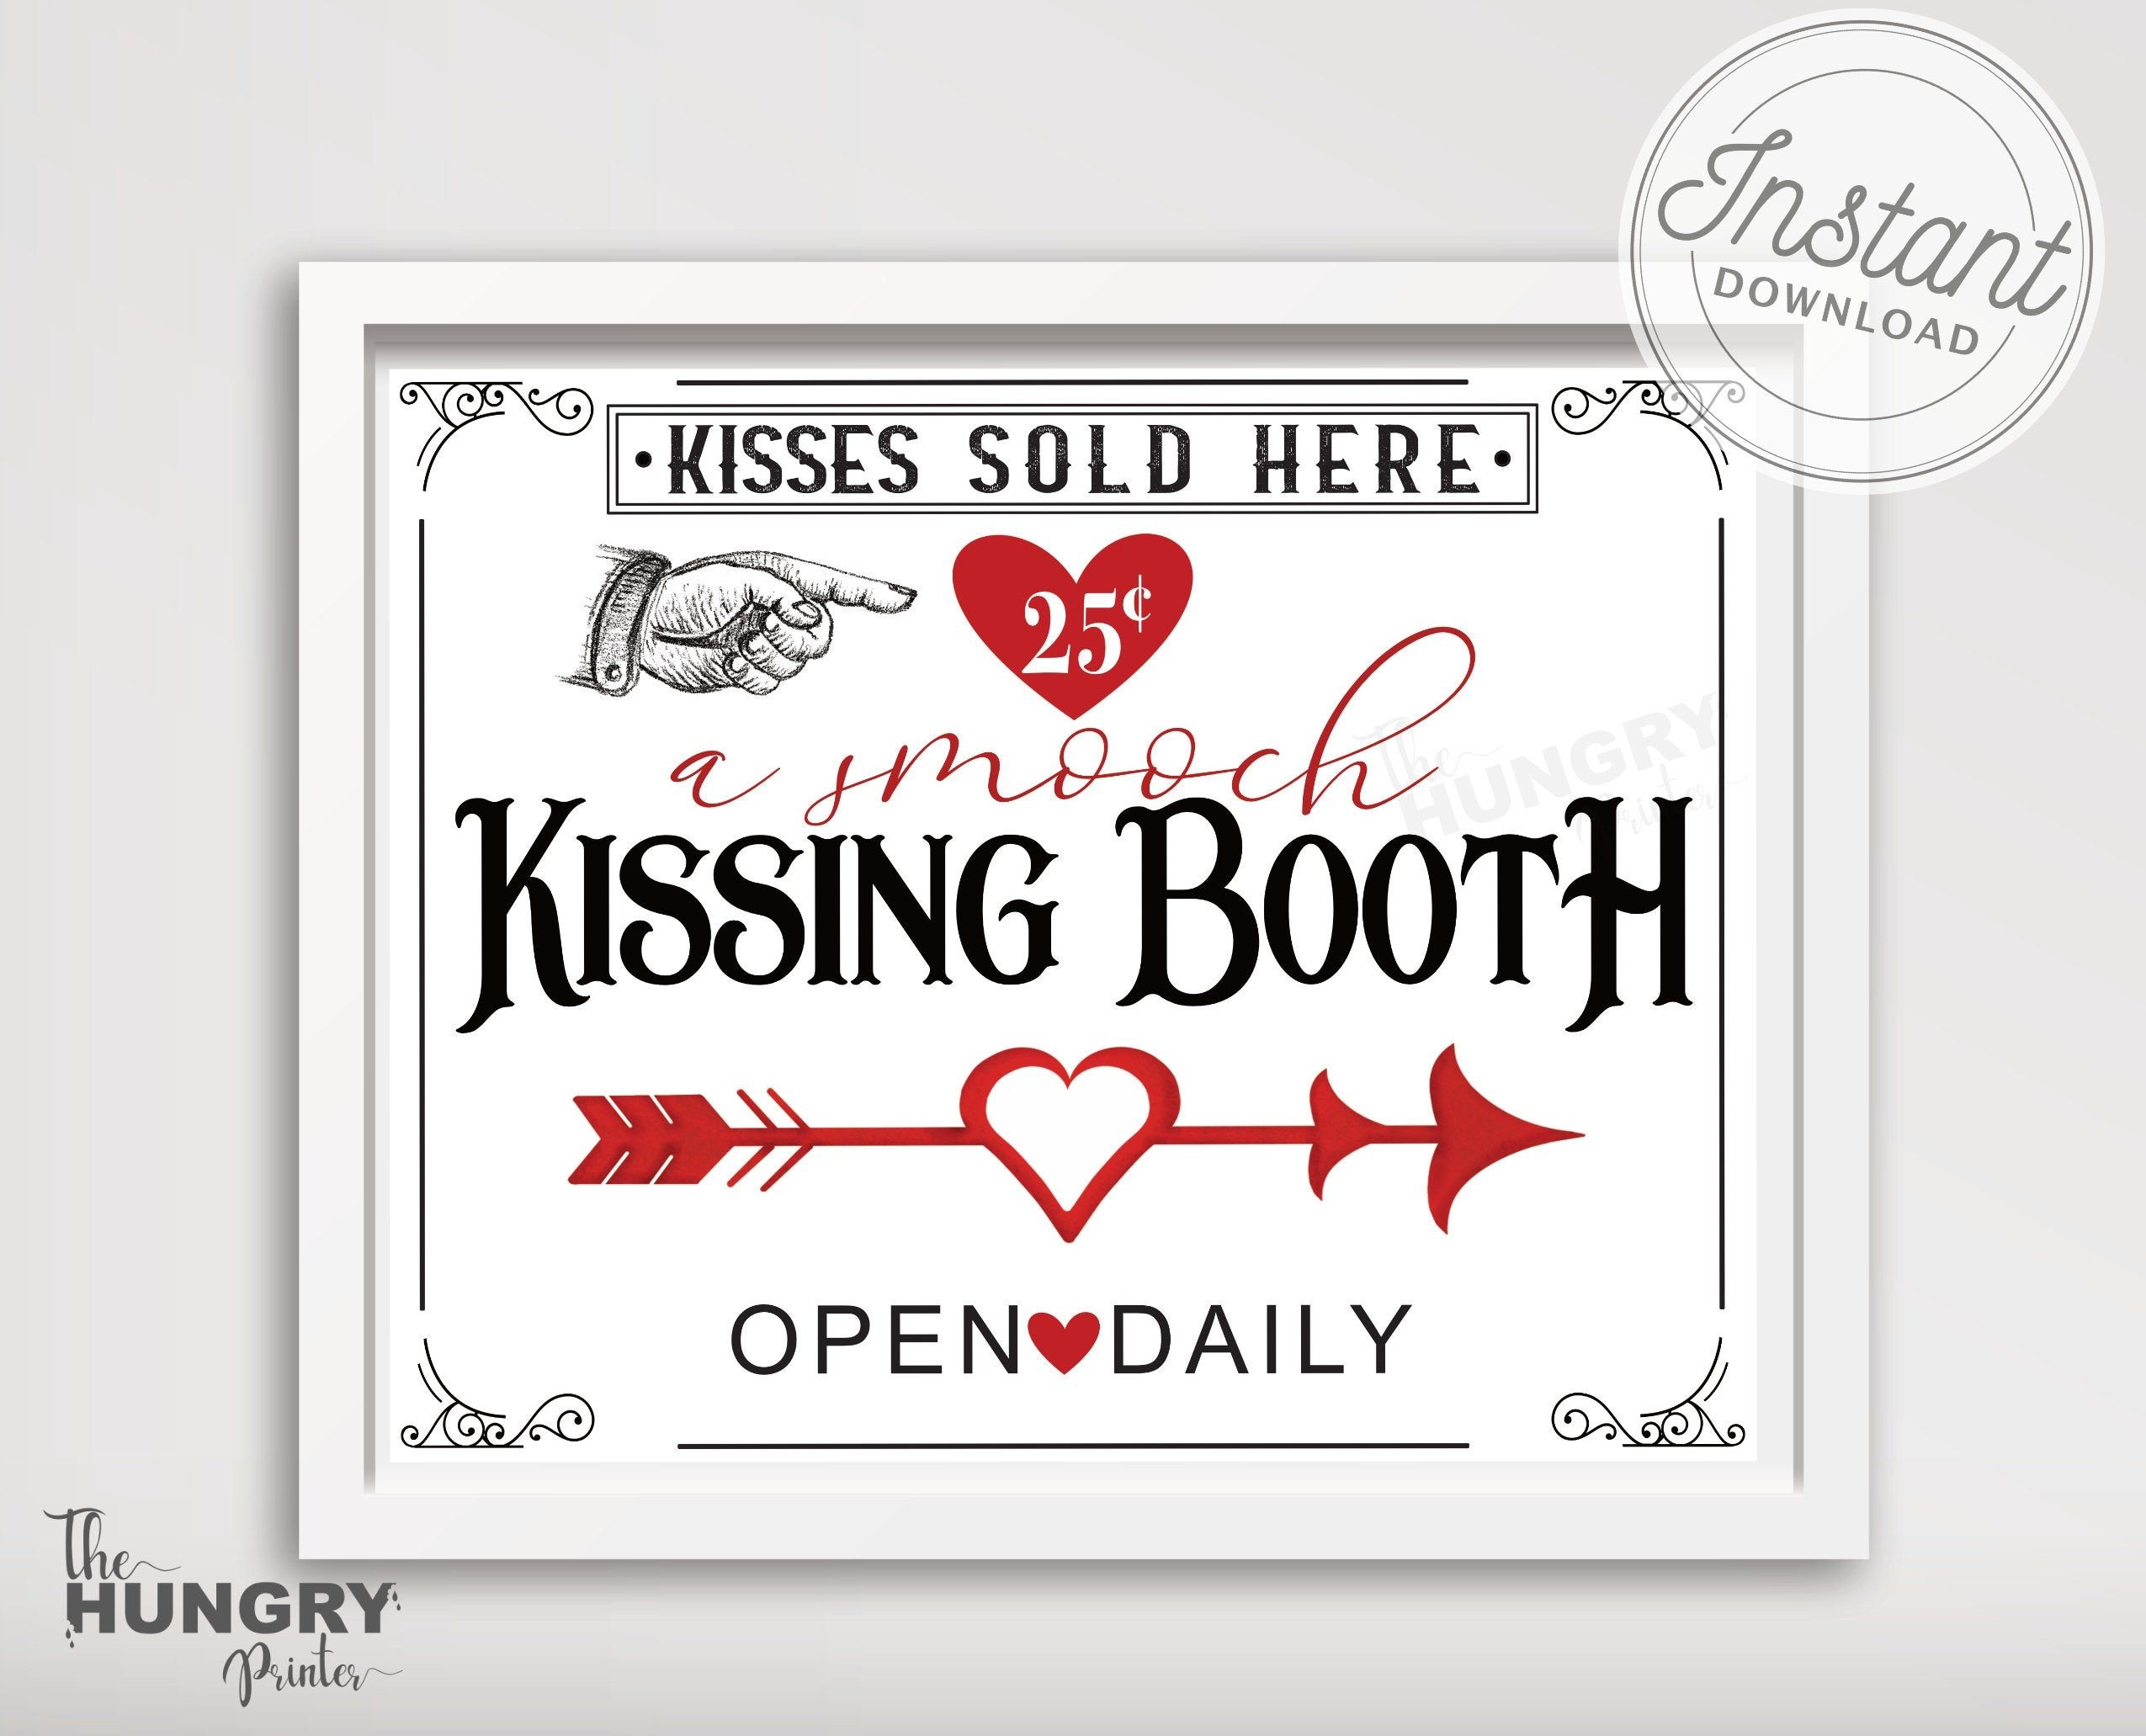 Kissing Booth Sign Printable Valentine Art Kissing Booth Prop Valentine s Day Kissing Booth Kissing Booth Art Valentine s Day Decor Etsy Printable Valentine Art Writing Paper Printable Stationery Kissing Booth